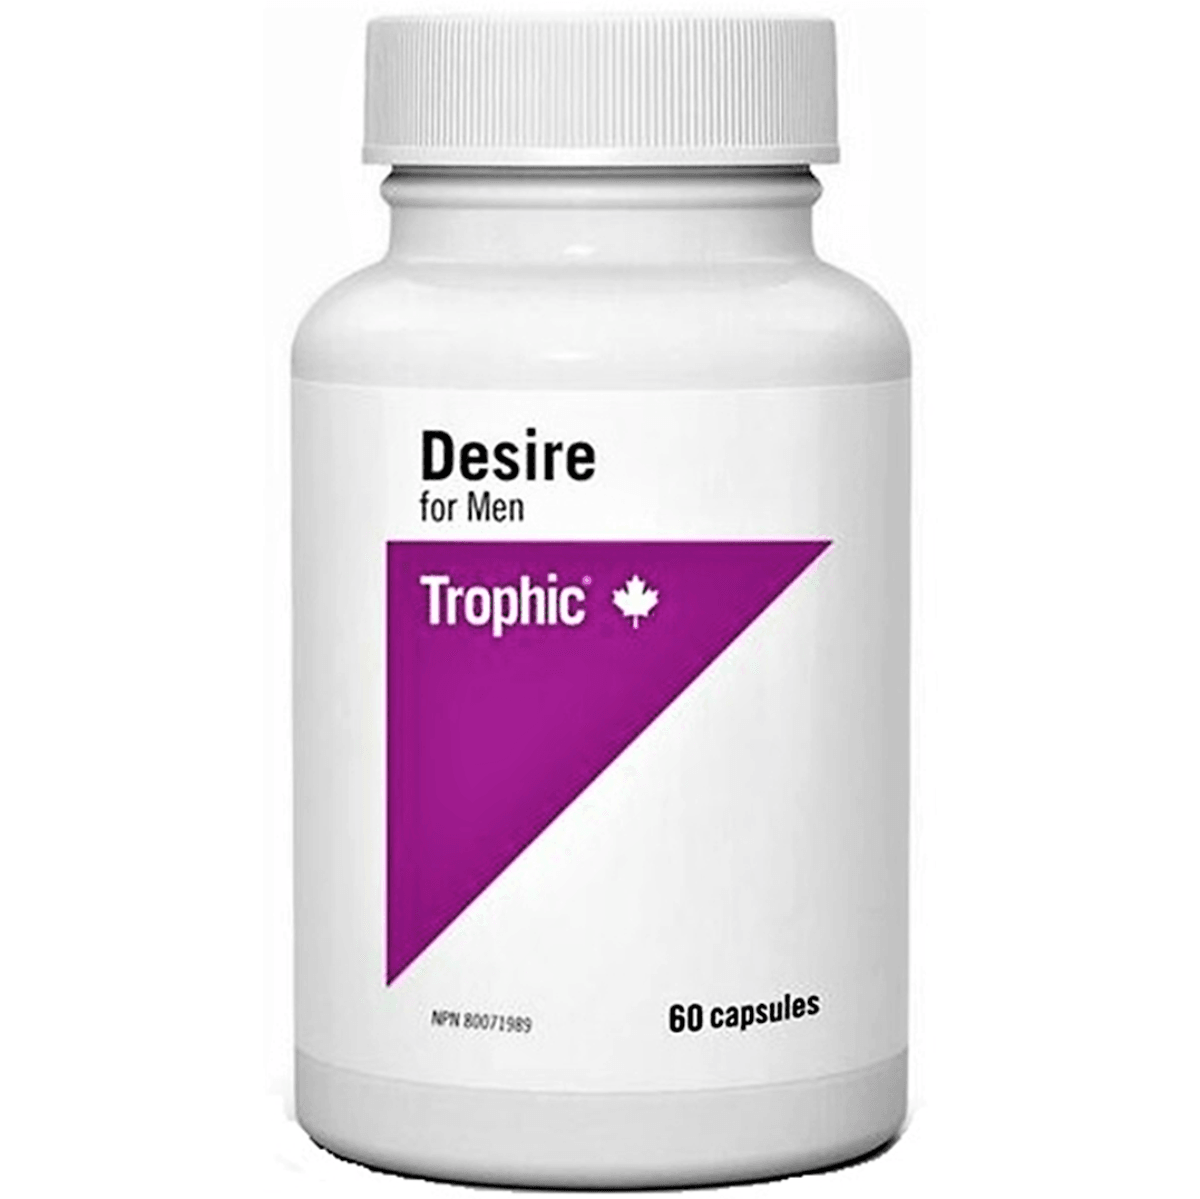 Trophic Desire For Men 60 Caps Supplements - Intimate Wellness at Village Vitamin Store